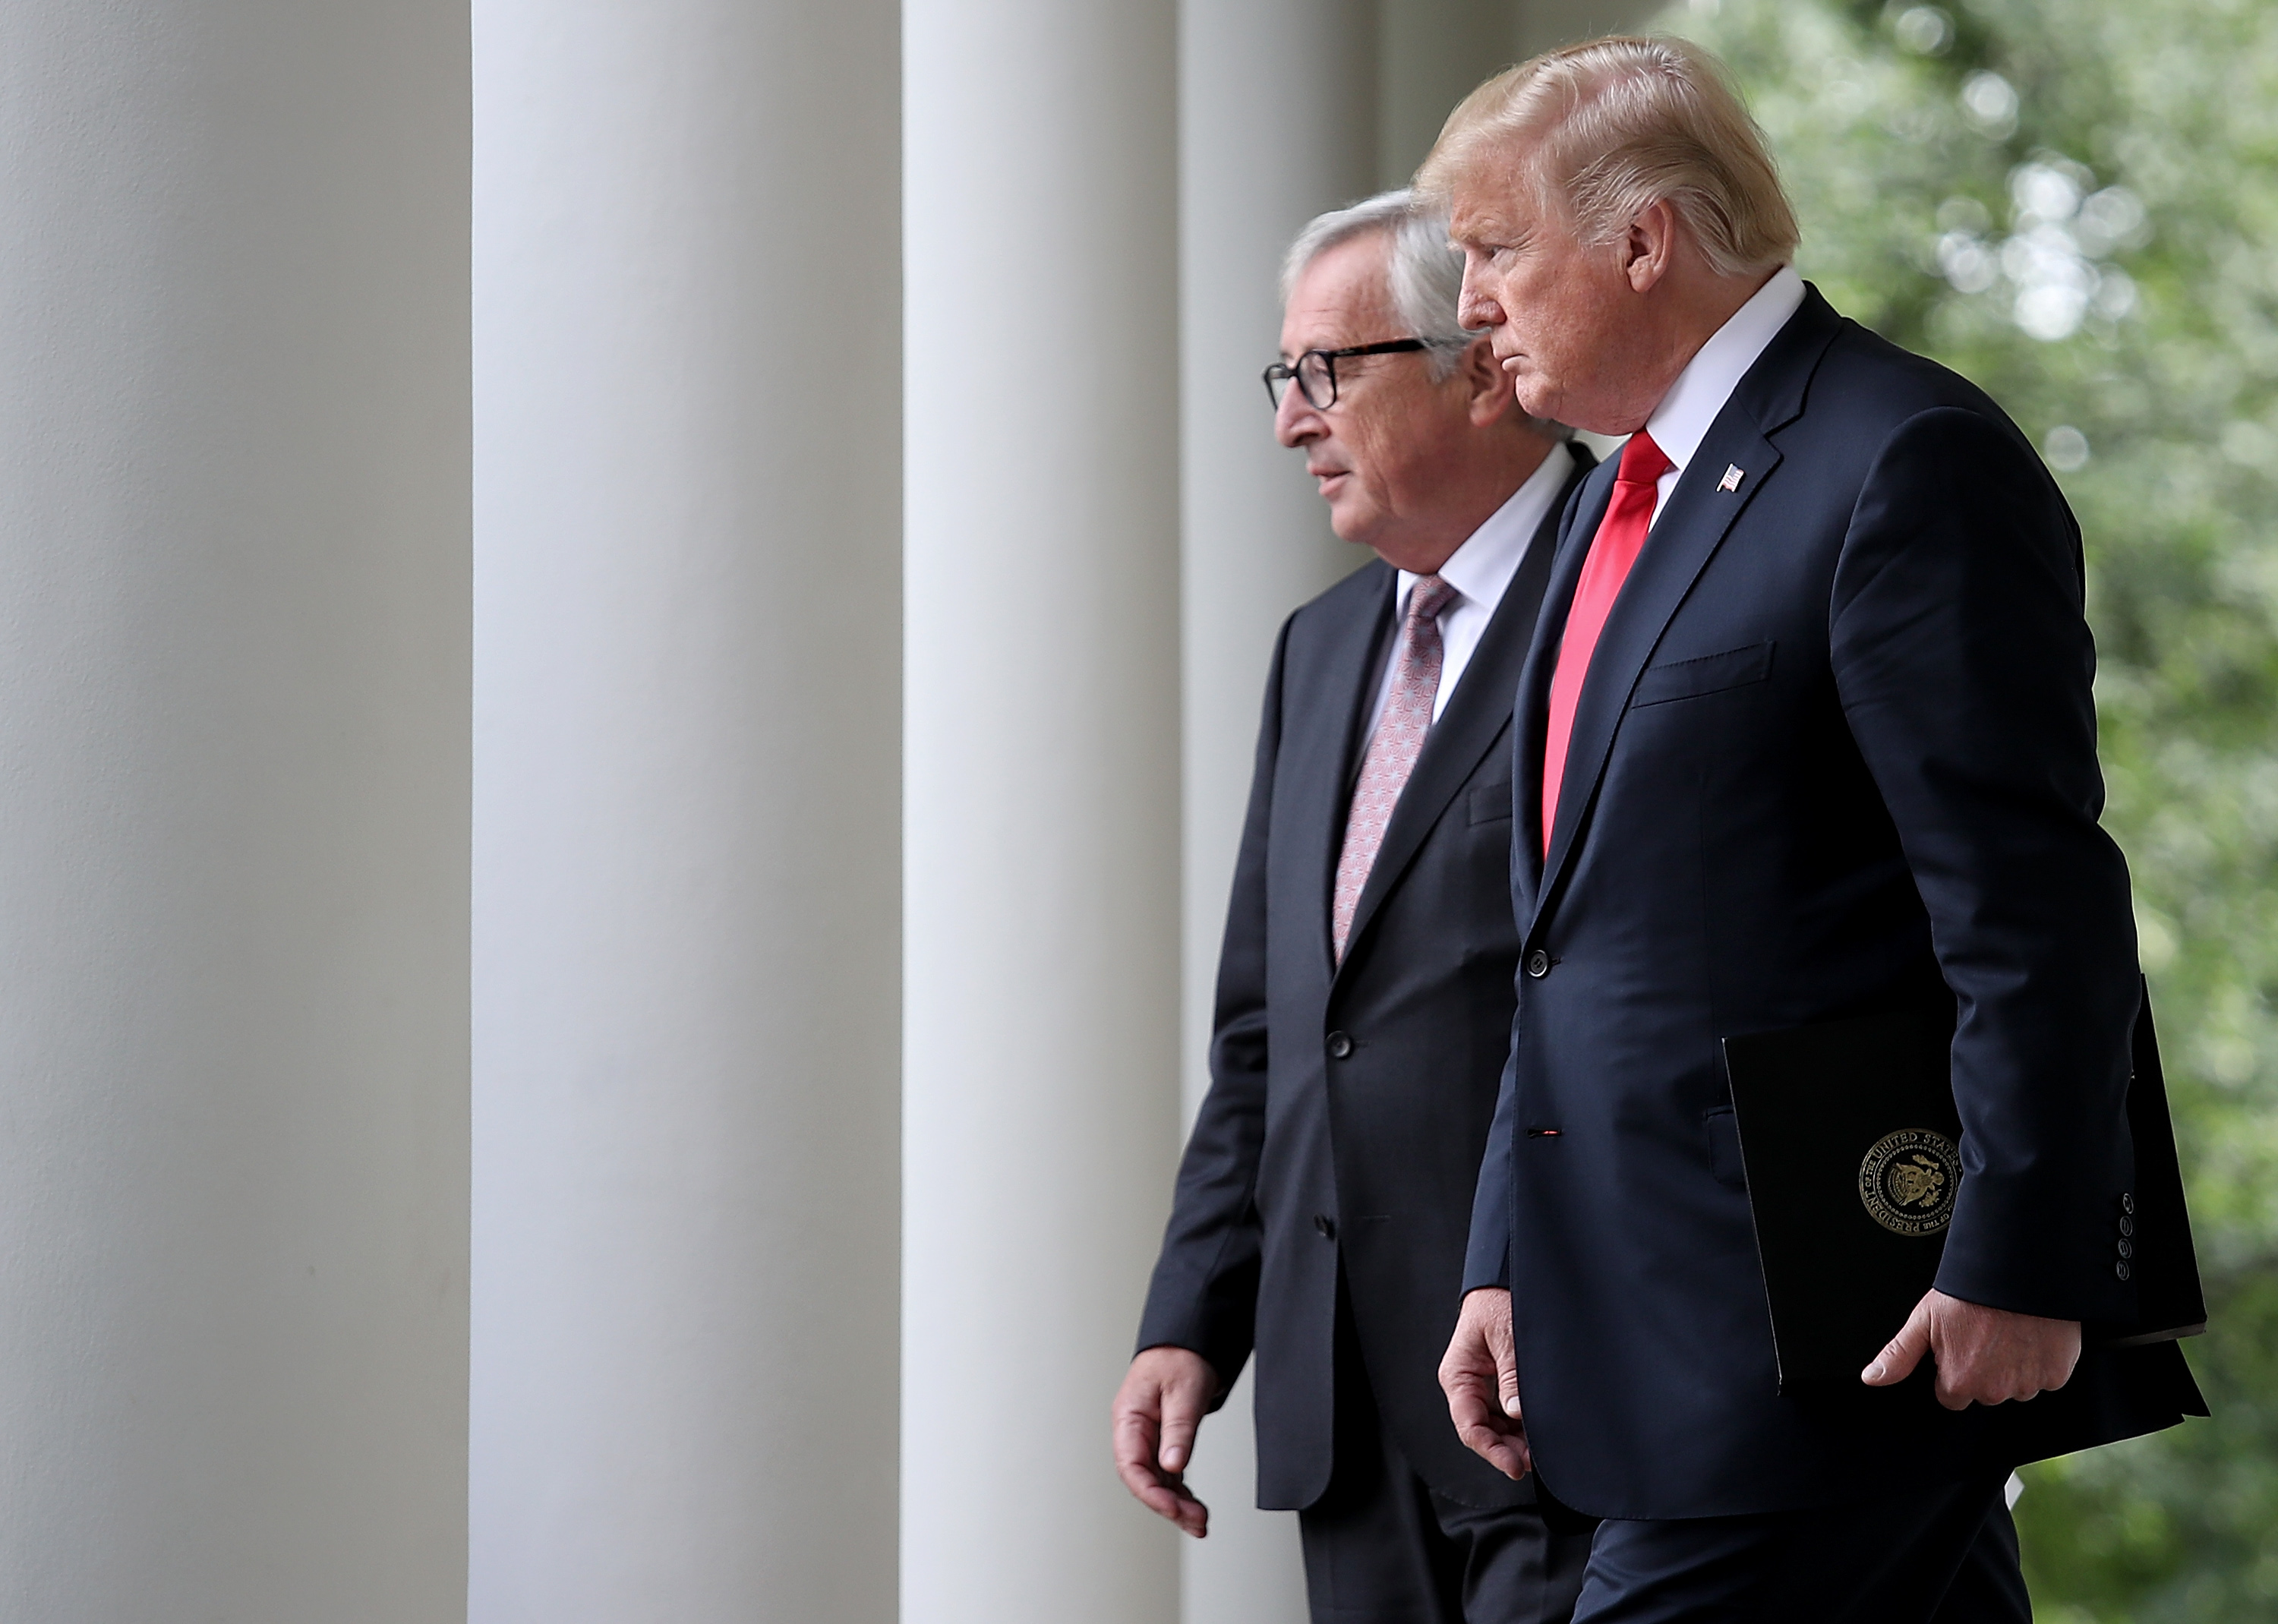 Trump and Juncker at the White House